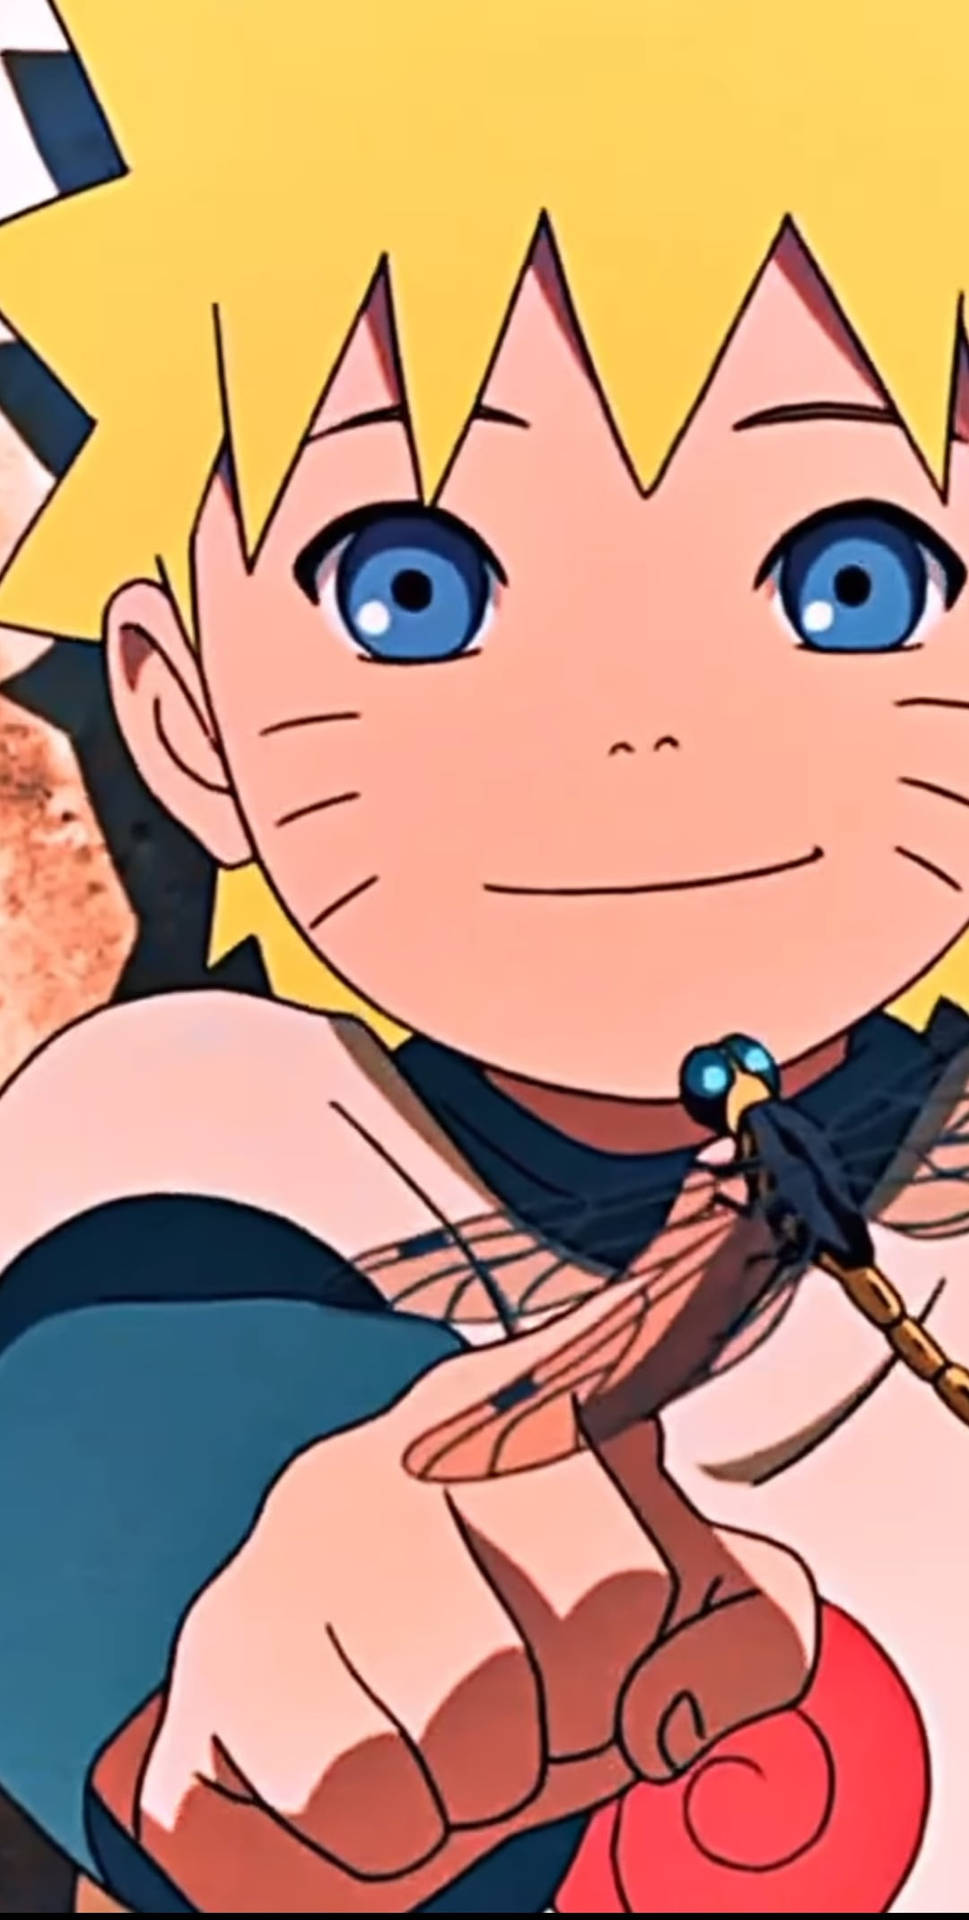 bill maynor recommends Cute Naruto Pictures